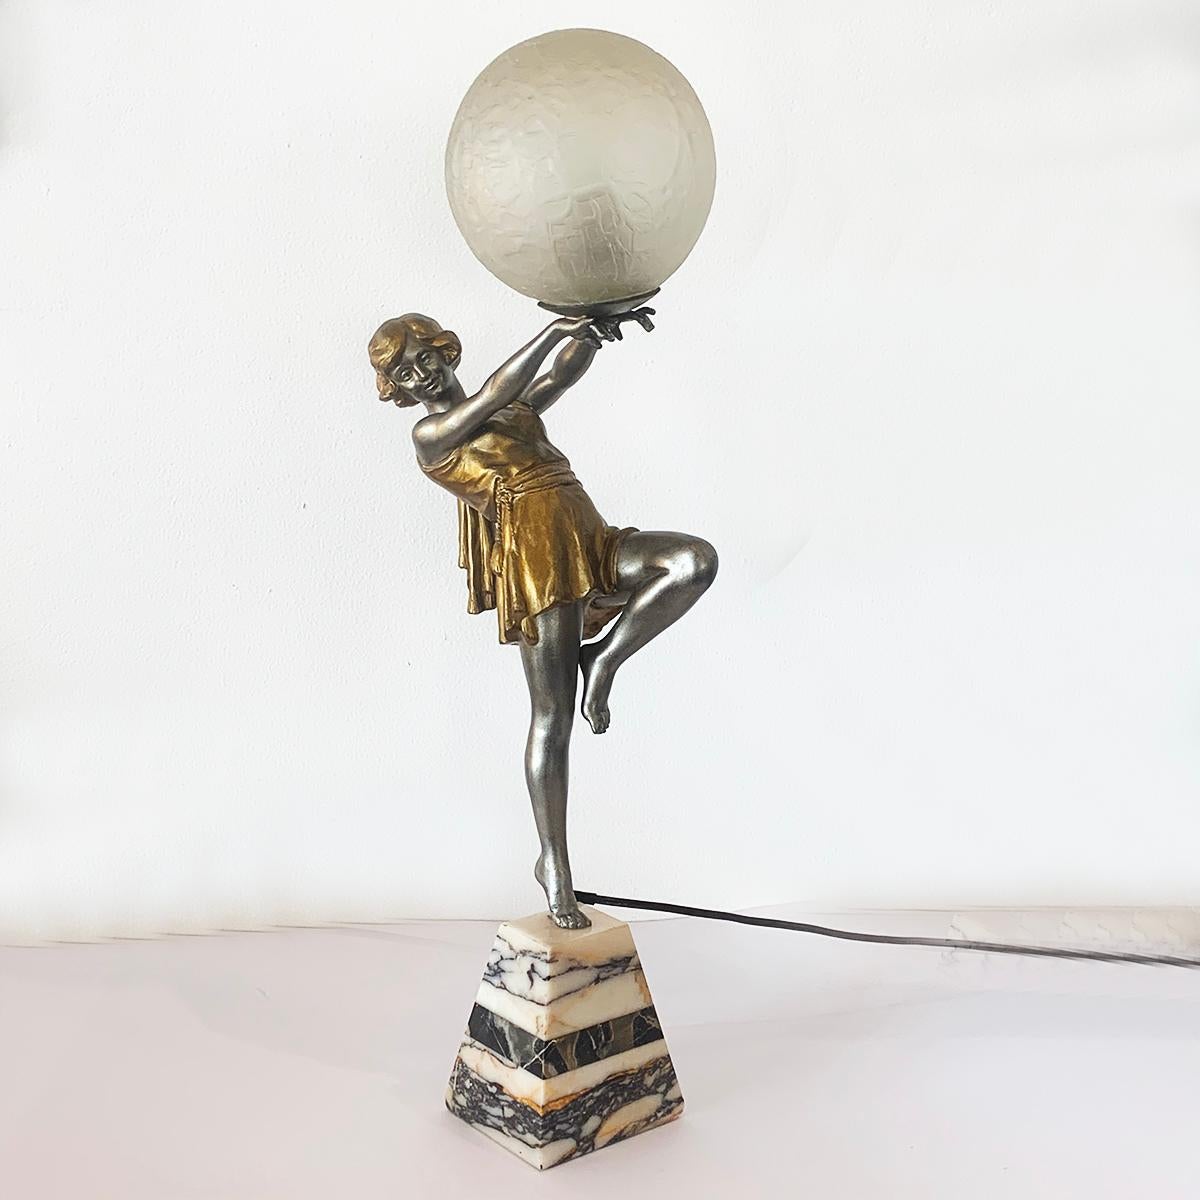 French Art Deco Dancer Lamp by Carlier In Good Condition For Sale In Daylesford, Victoria